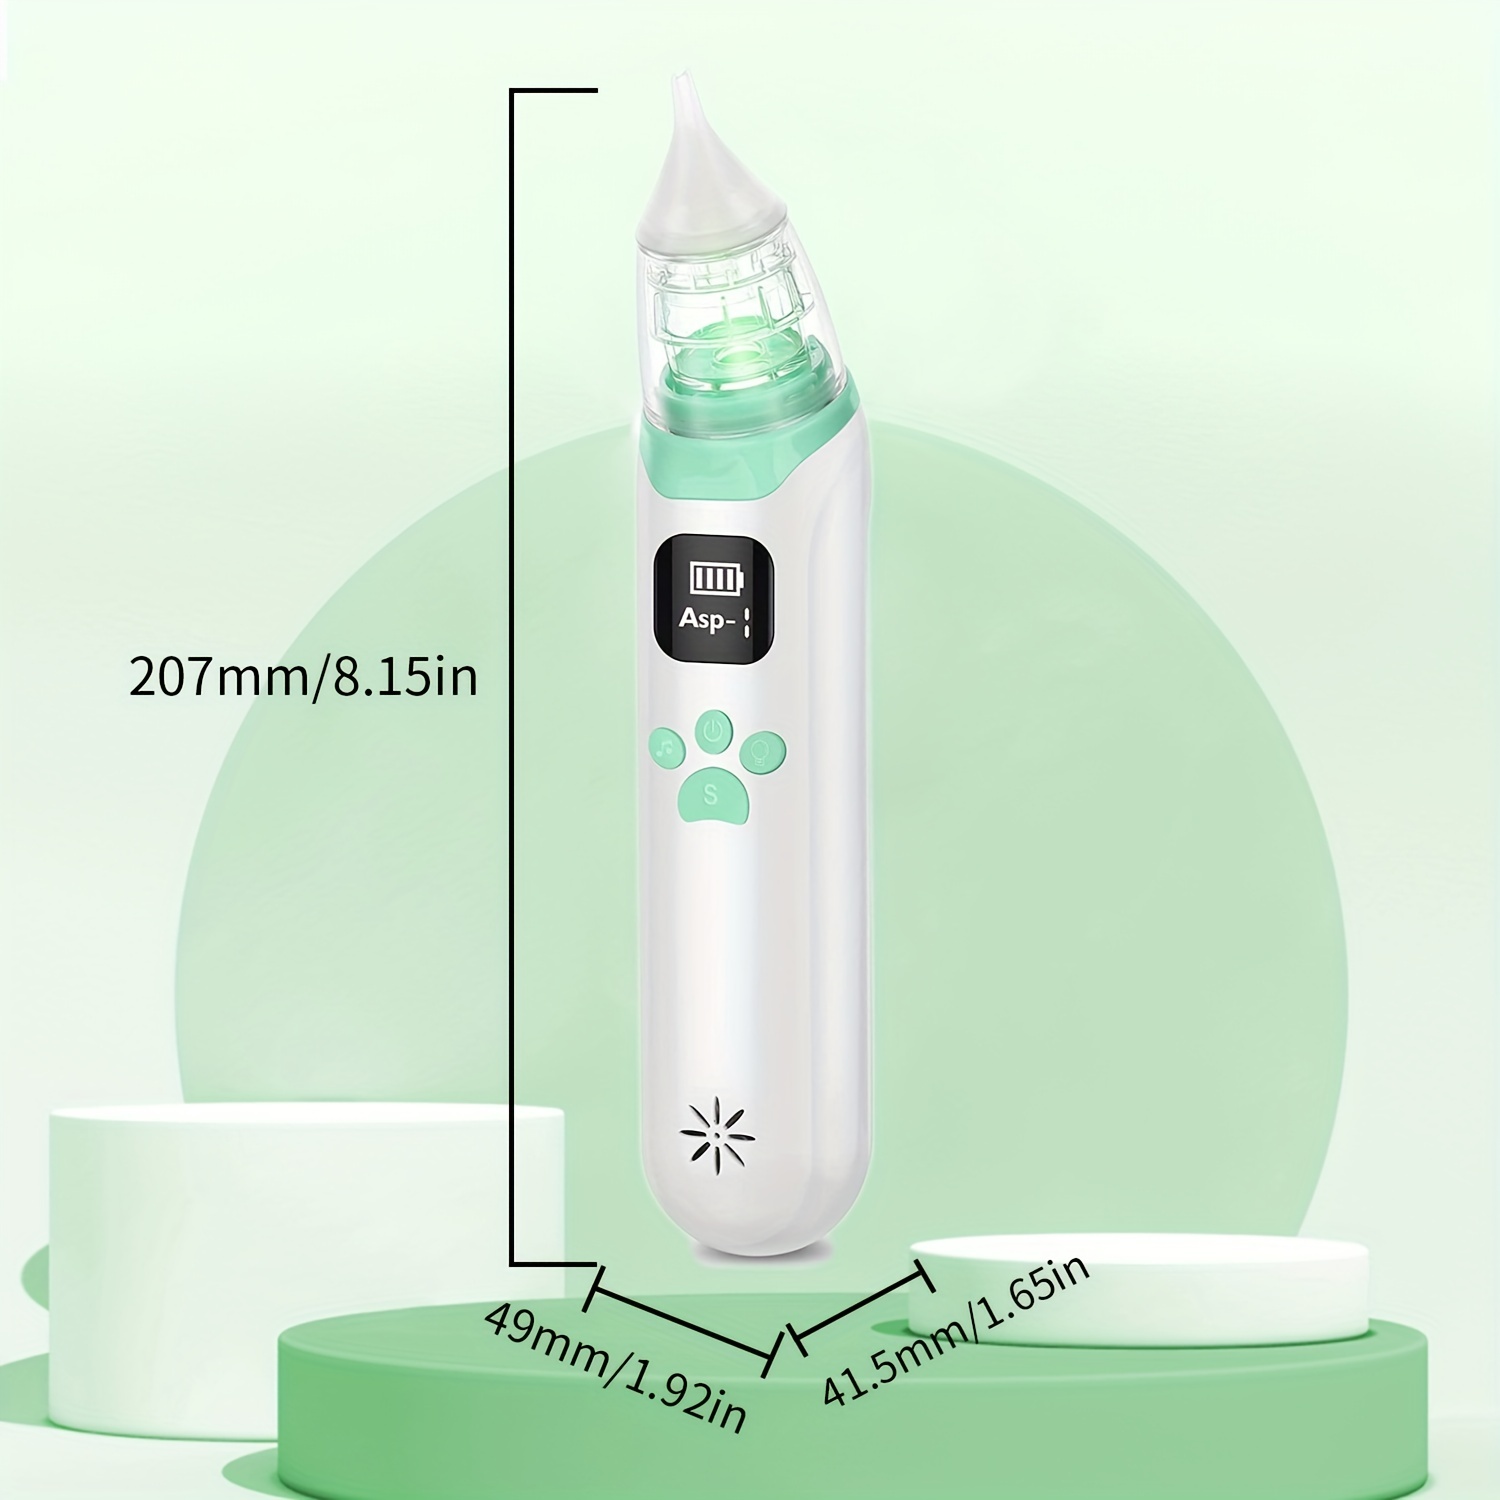 Baby Nasal Aspirator - Electric Baby Nose Sucker Cleaner with 3